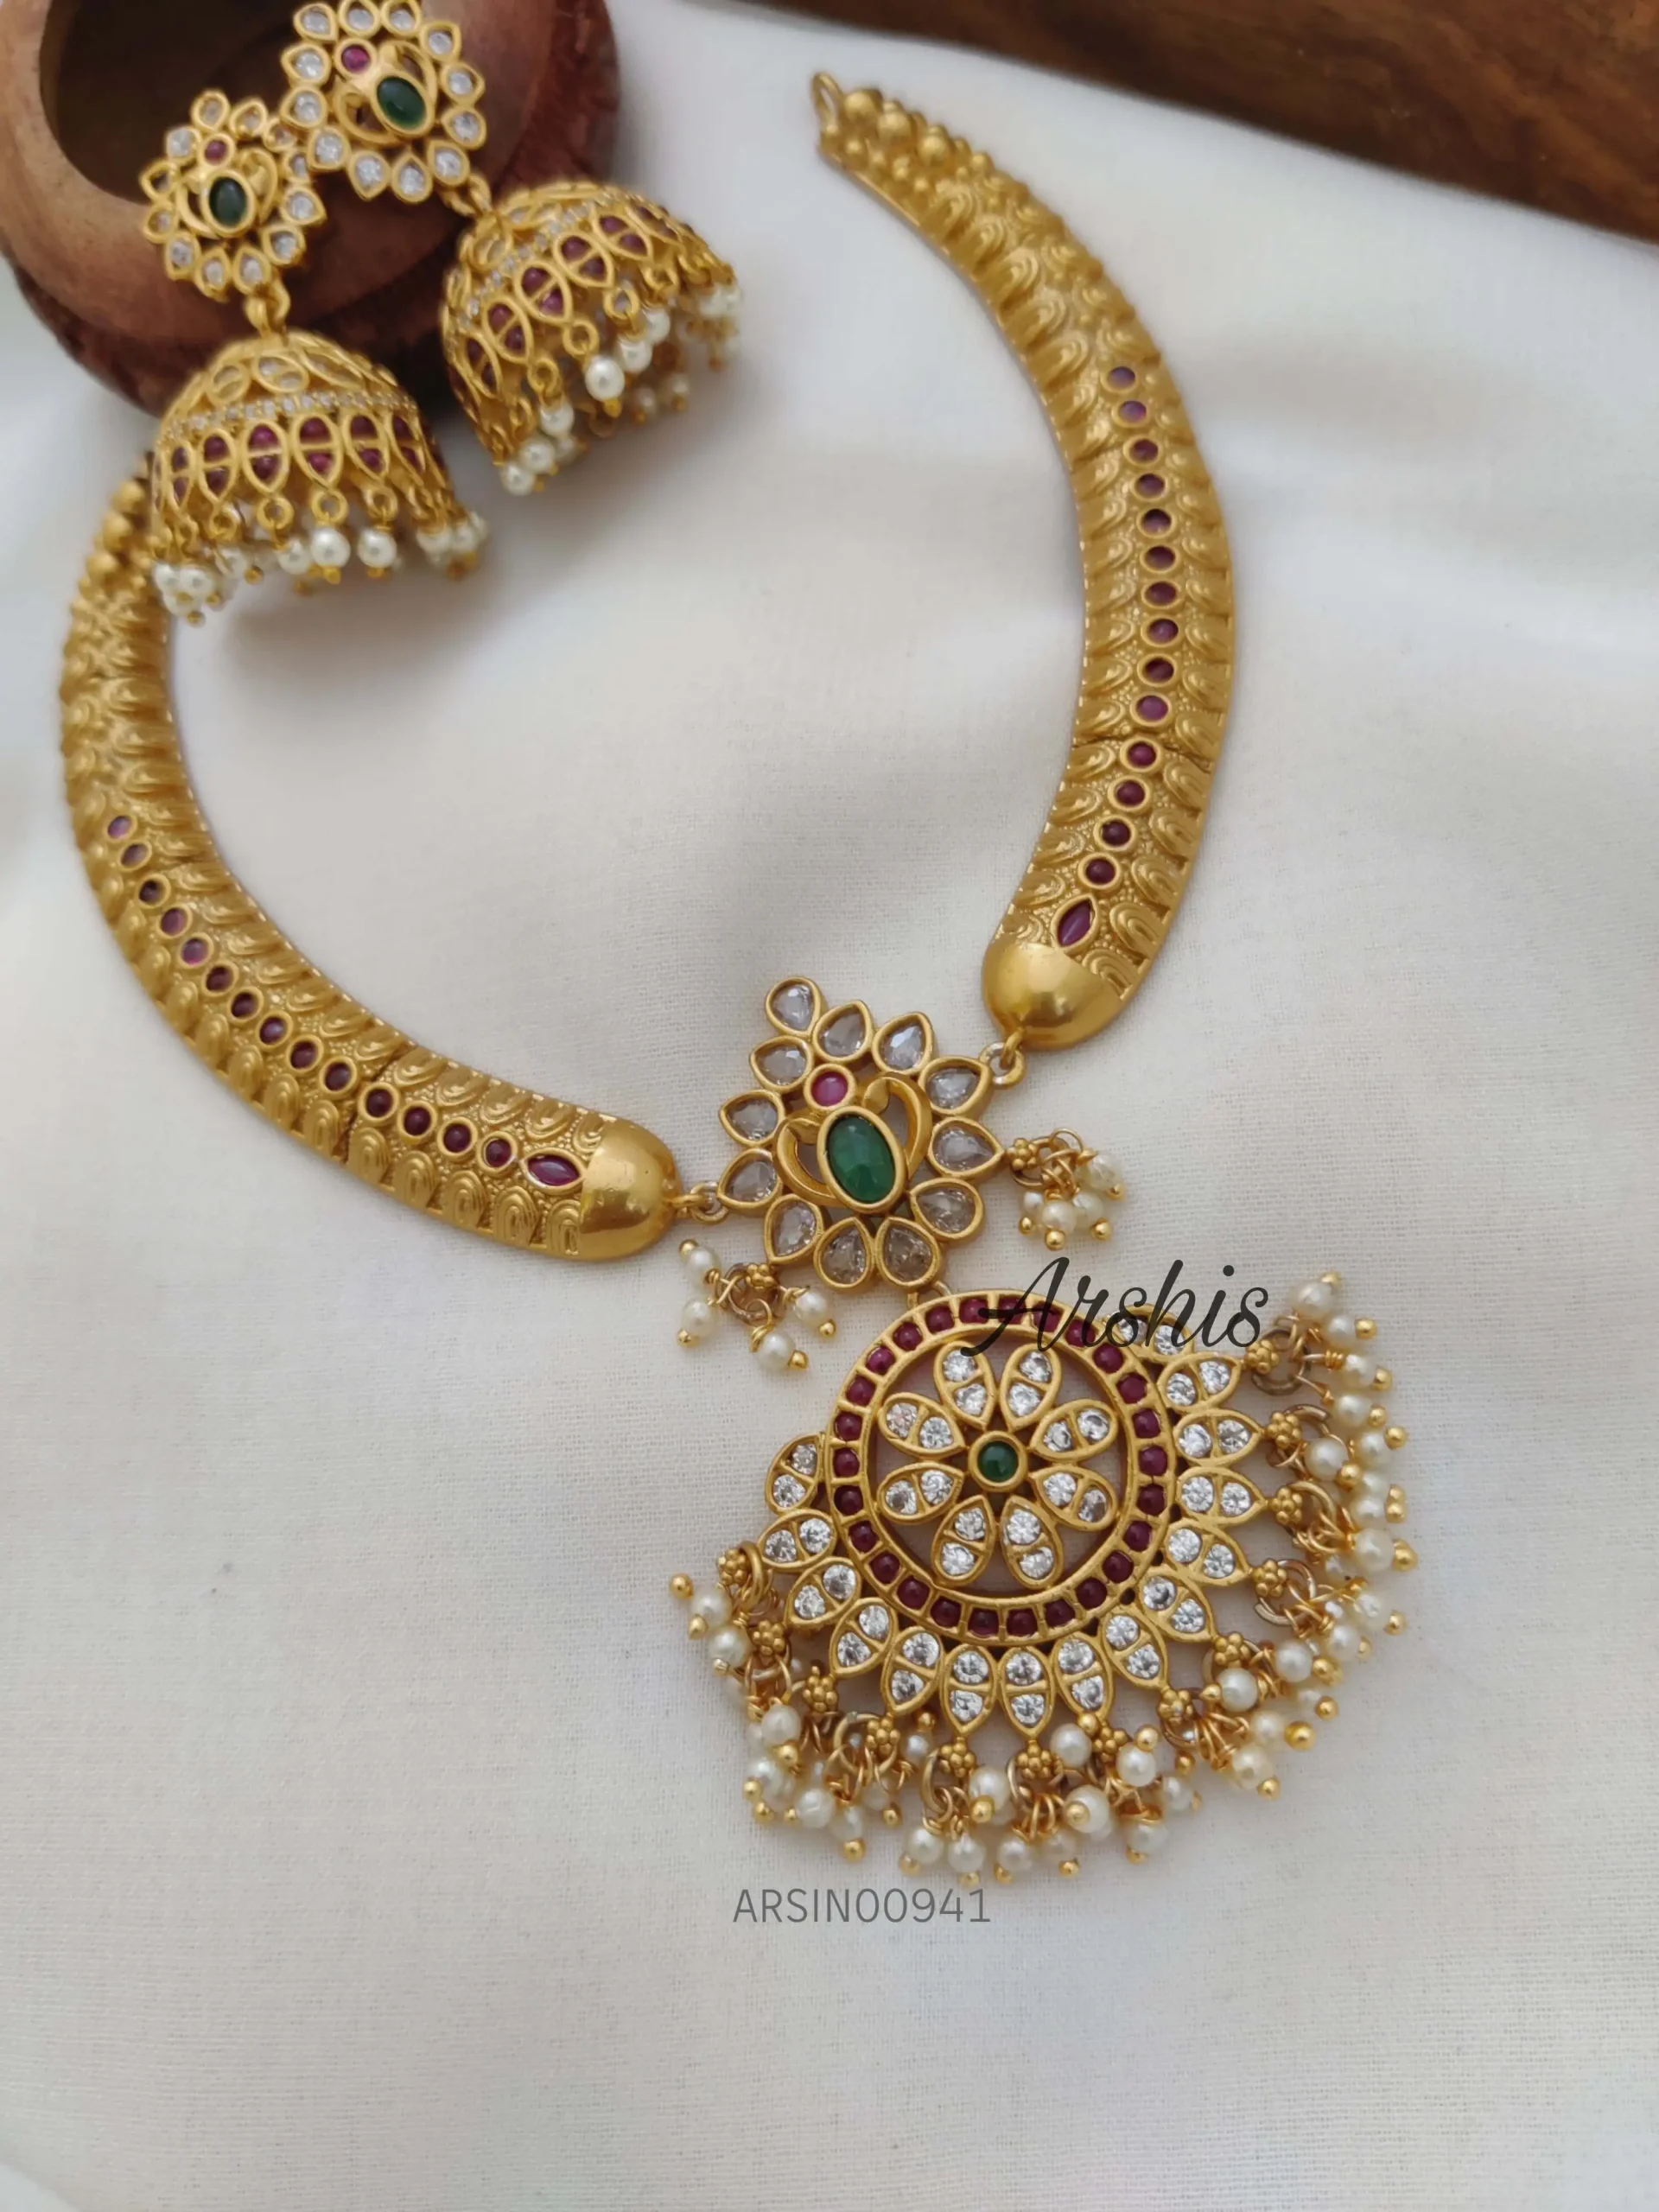 Antique gold kante necklace - Indian Jewellery Designs